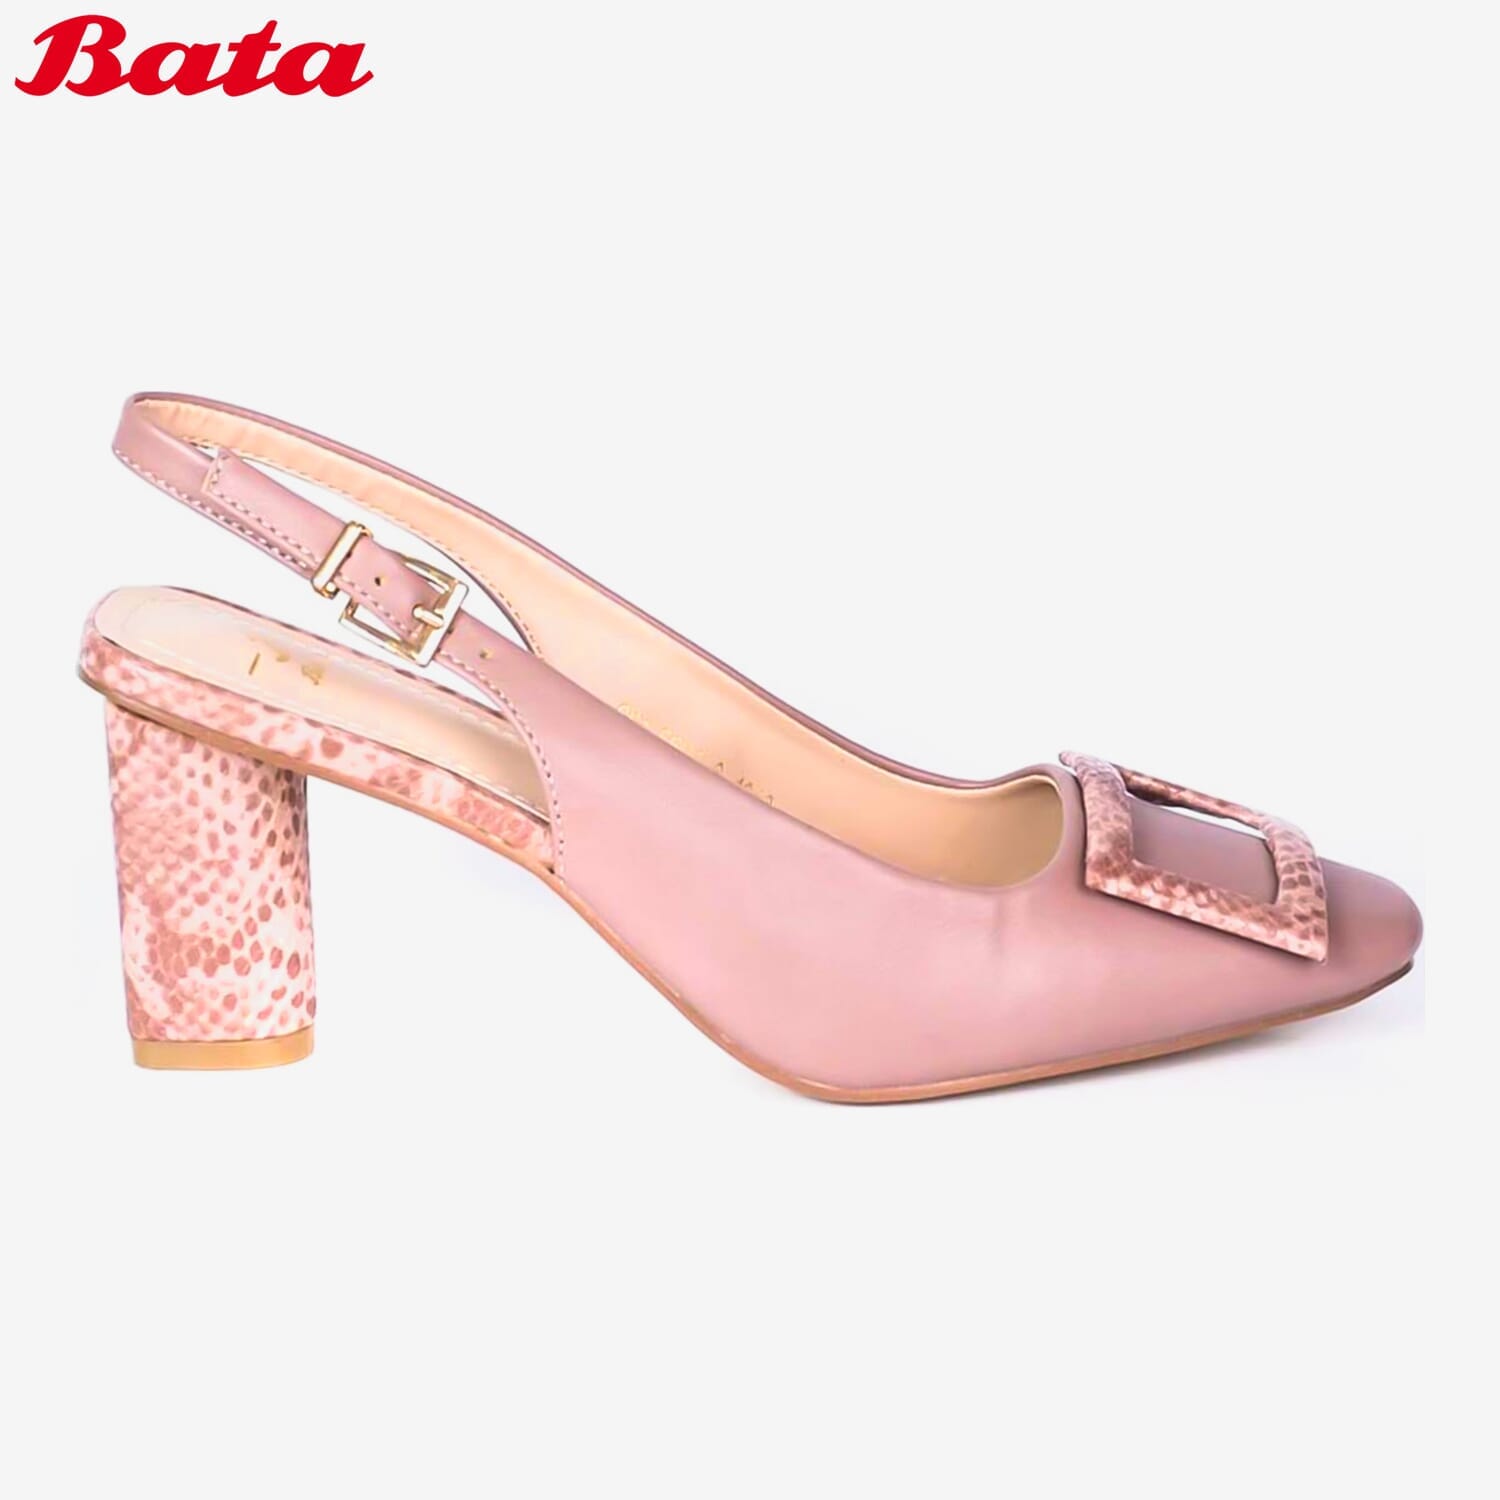 Bata - Come on girls! Your valentine shoe is waiting at... | Facebook